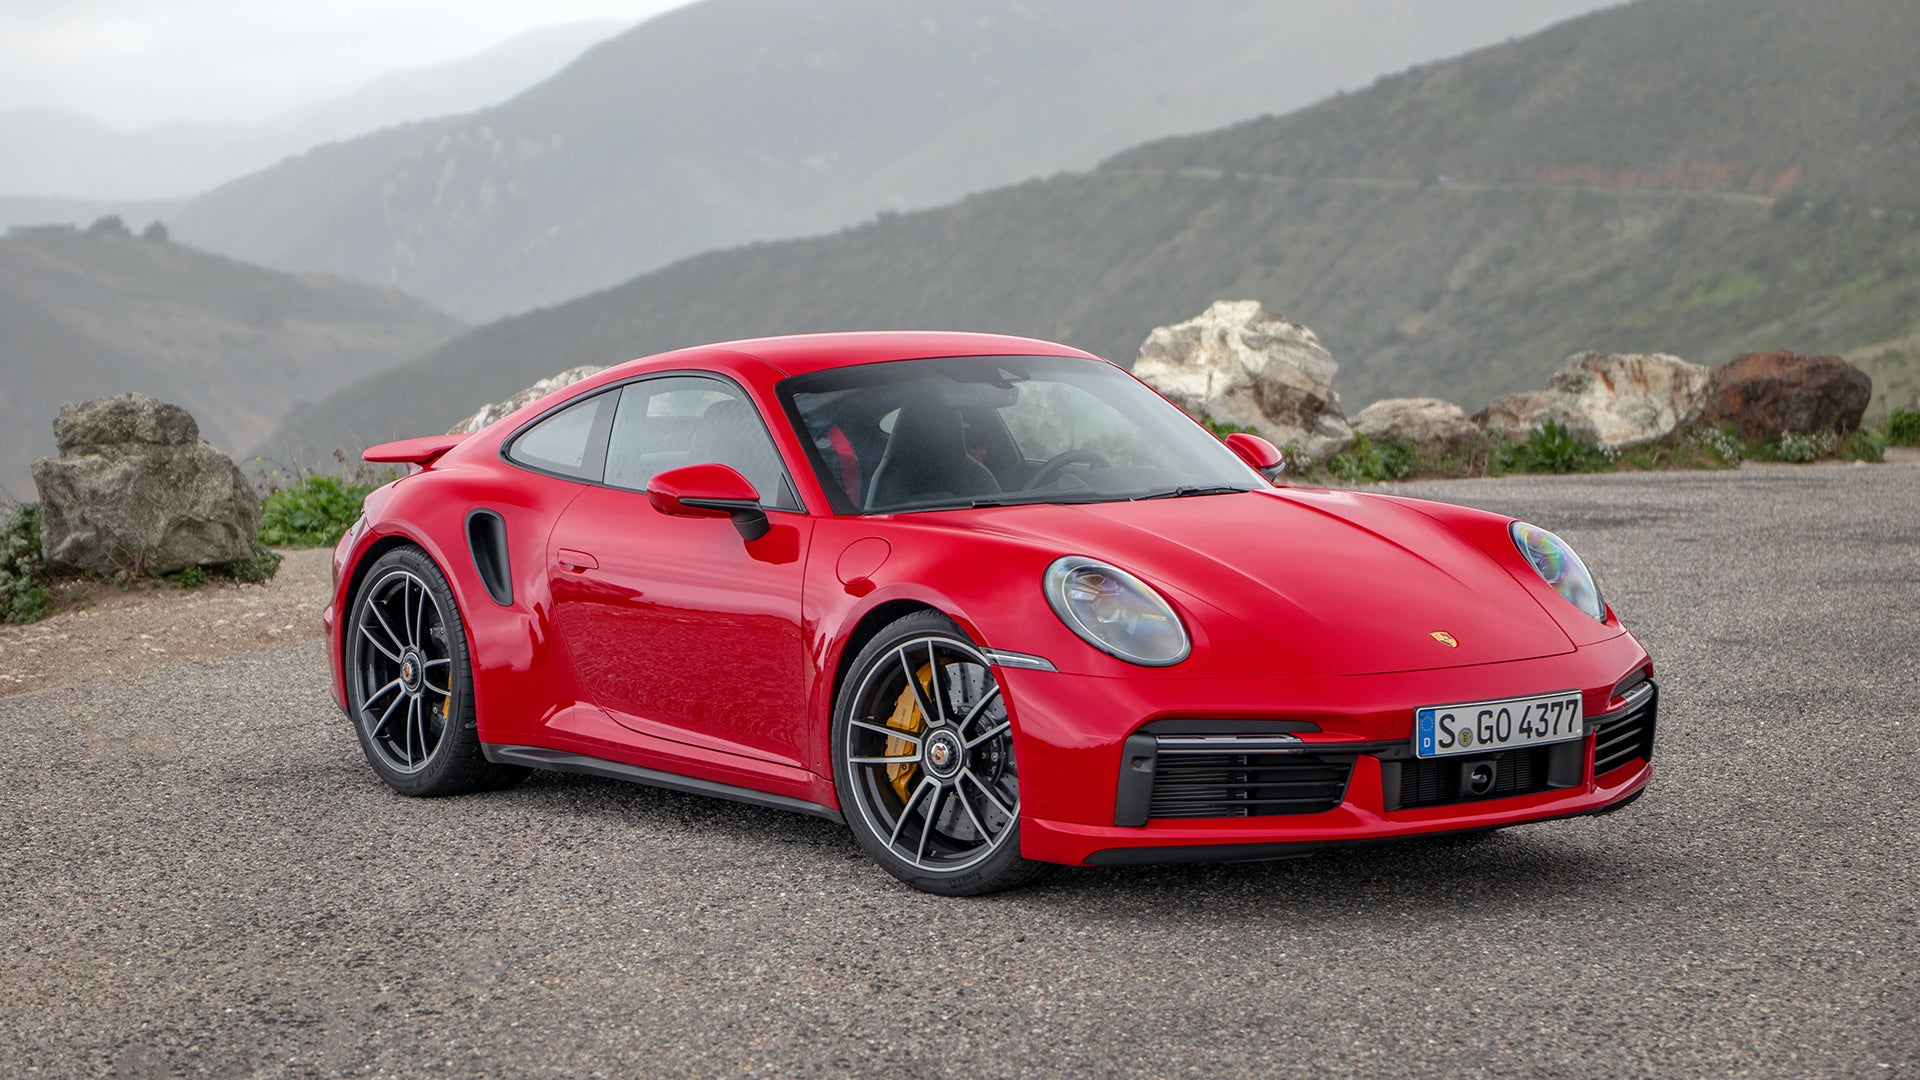 2021 Porsche 911 Turbo S Review A Champion Emerges in the